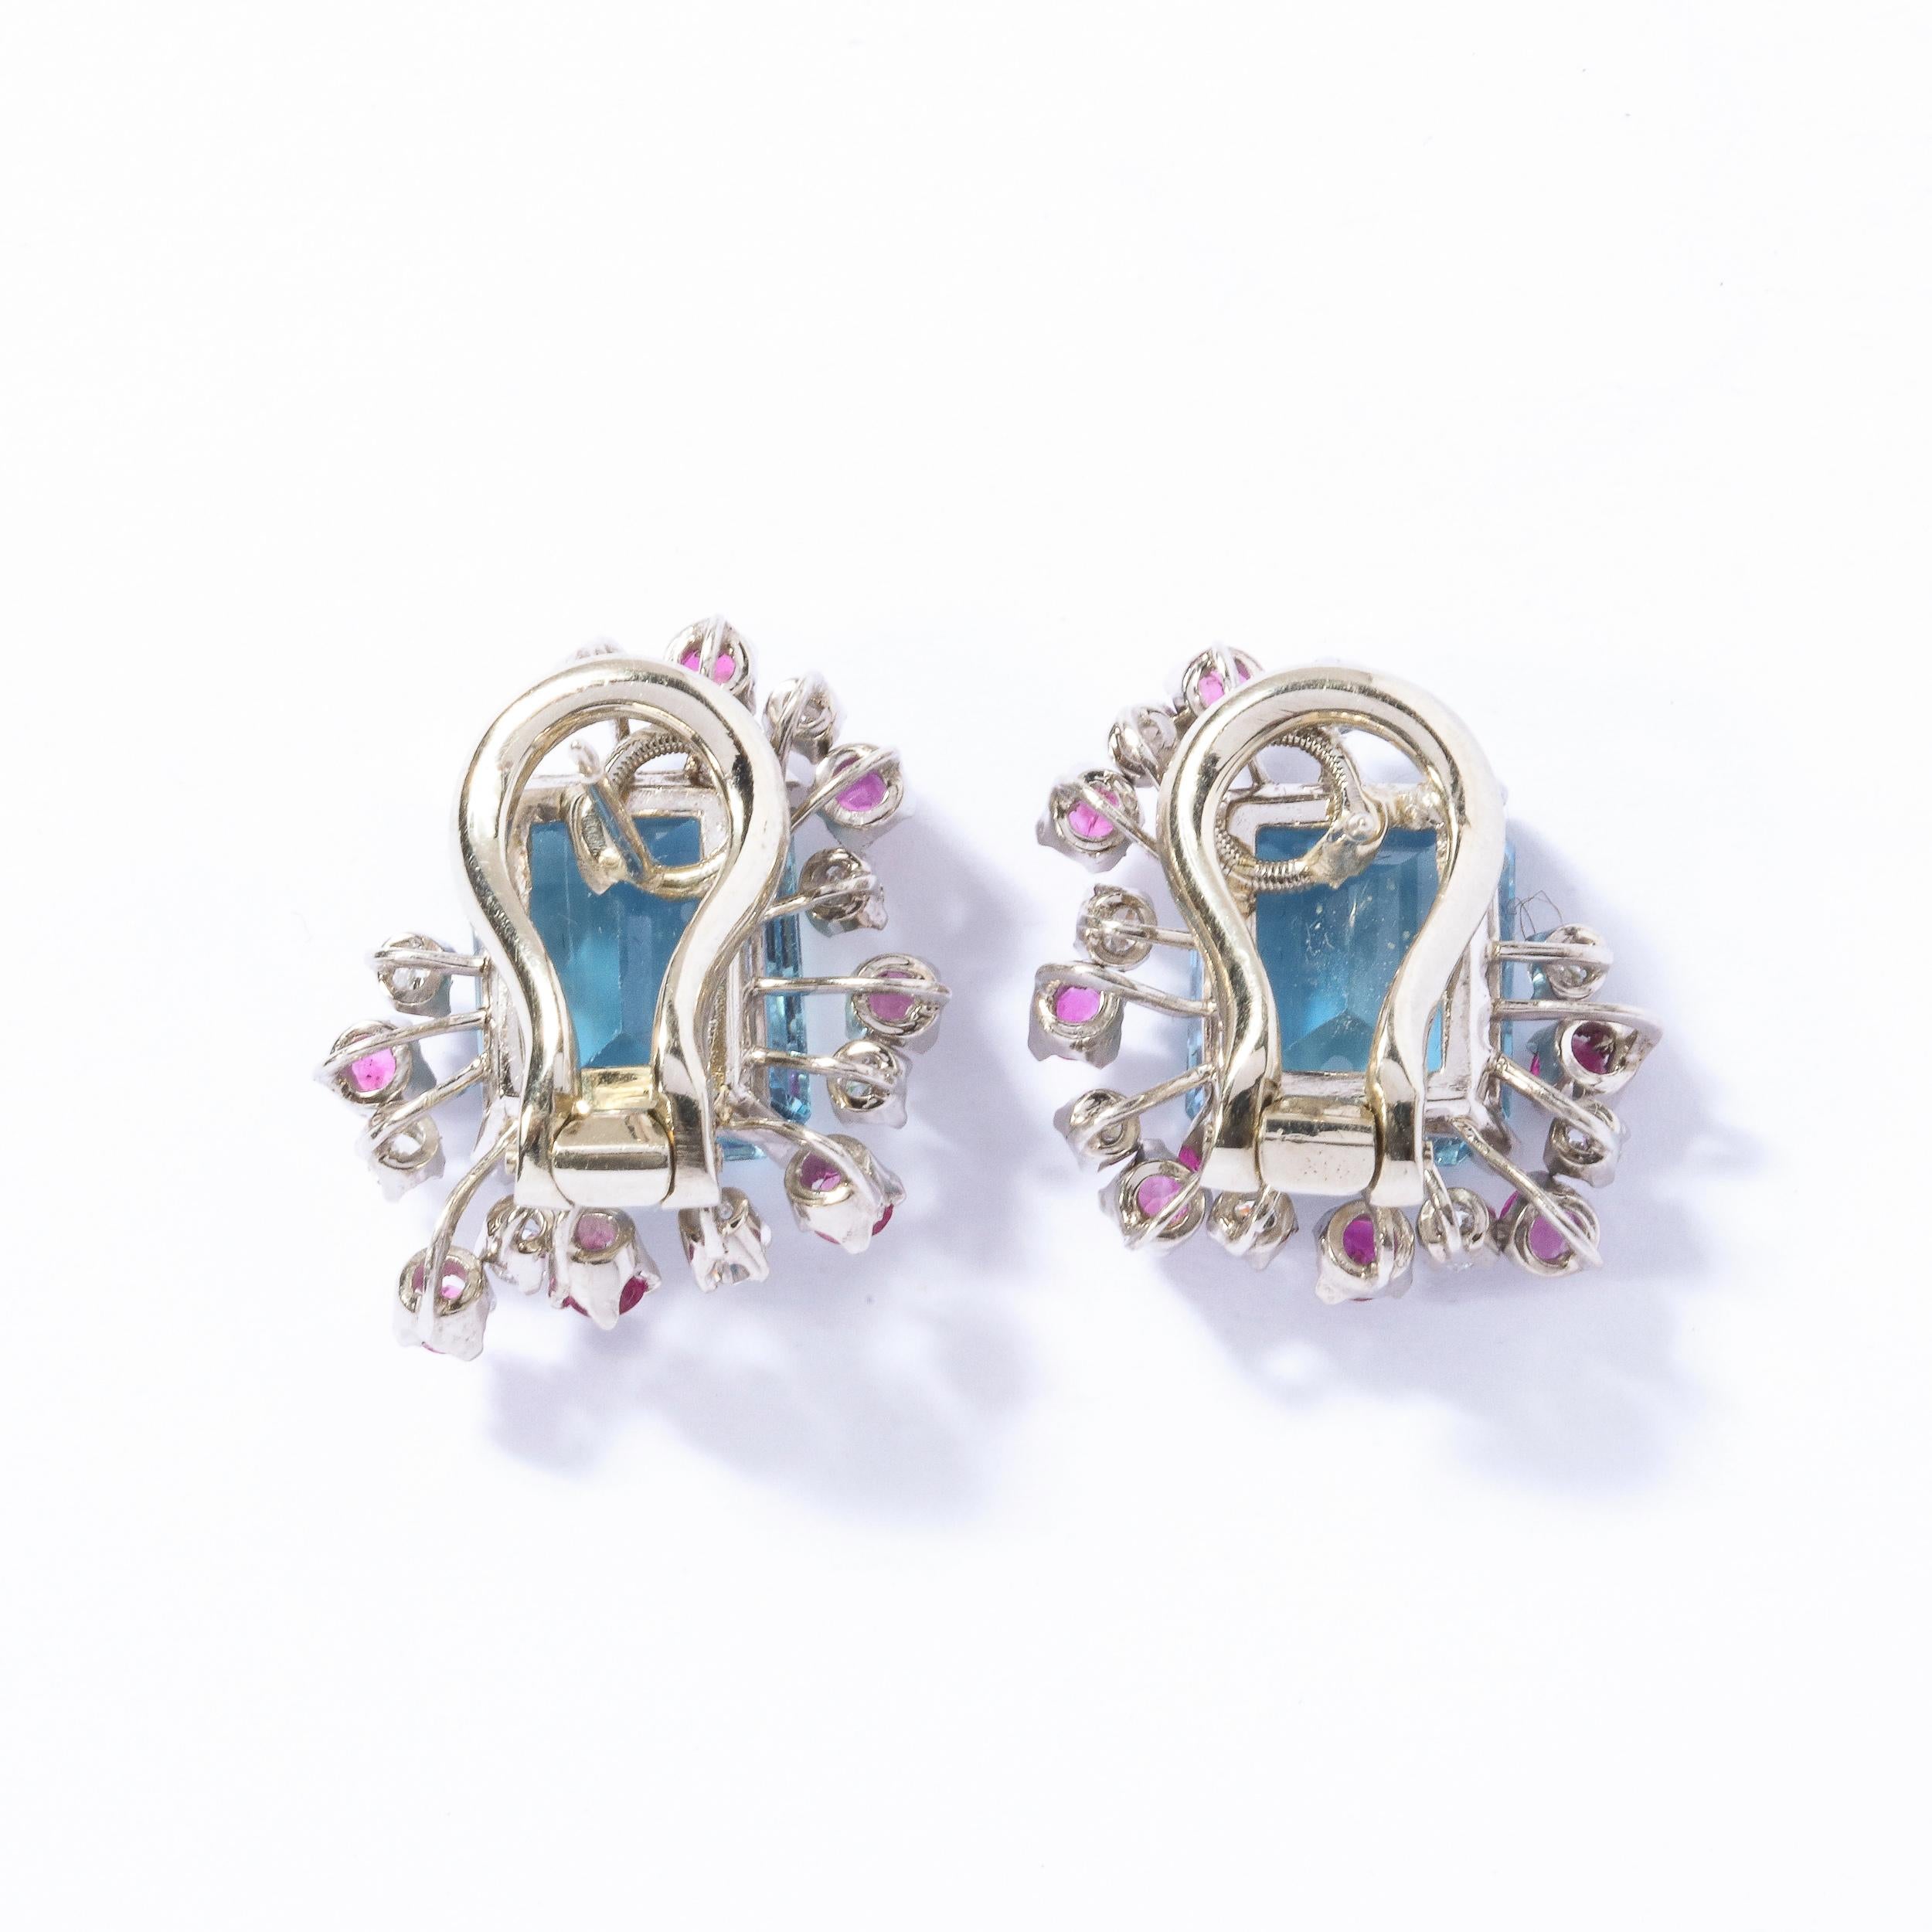 1940s 12 Carat Aquamarine and 14K White Gold Earrings with Diamonds and Rubies For Sale 8